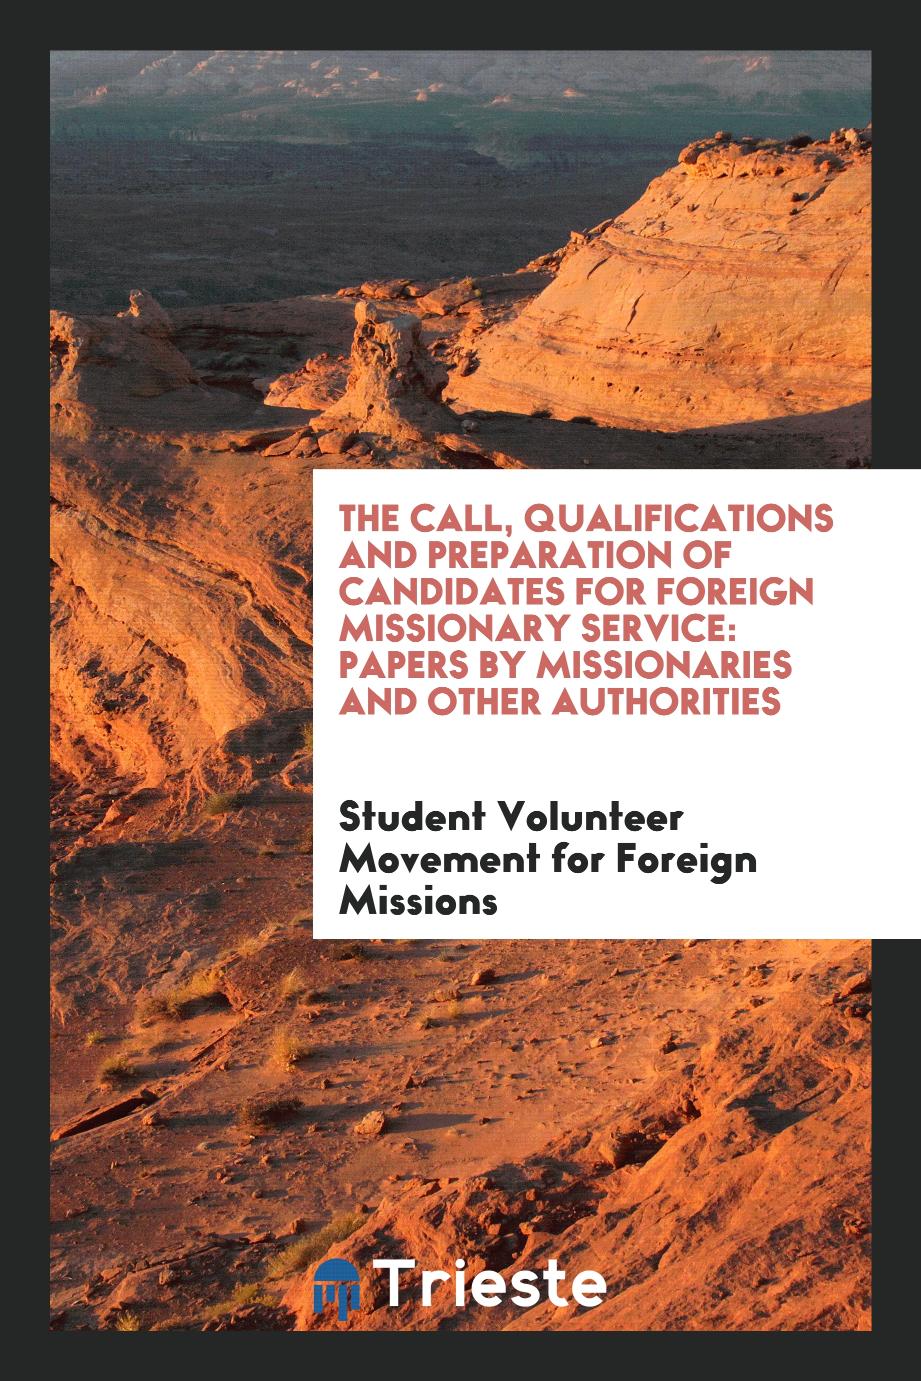 The Call, Qualifications and Preparation of Candidates for Foreign Missionary Service: Papers by Missionaries and Other Authorities